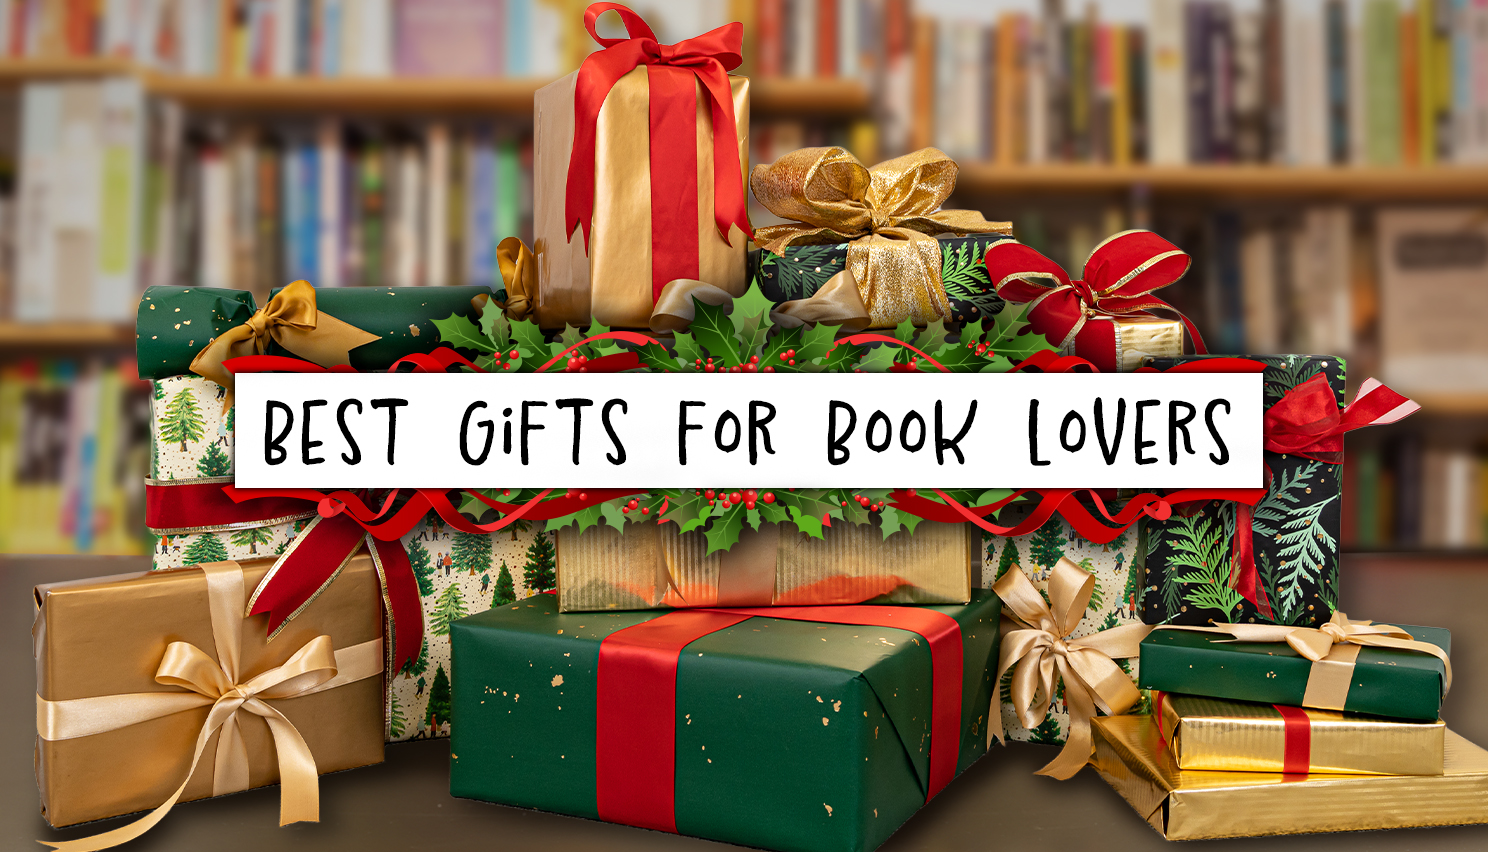 Best Last Minute Gifts for Book Lovers - B&N Reads